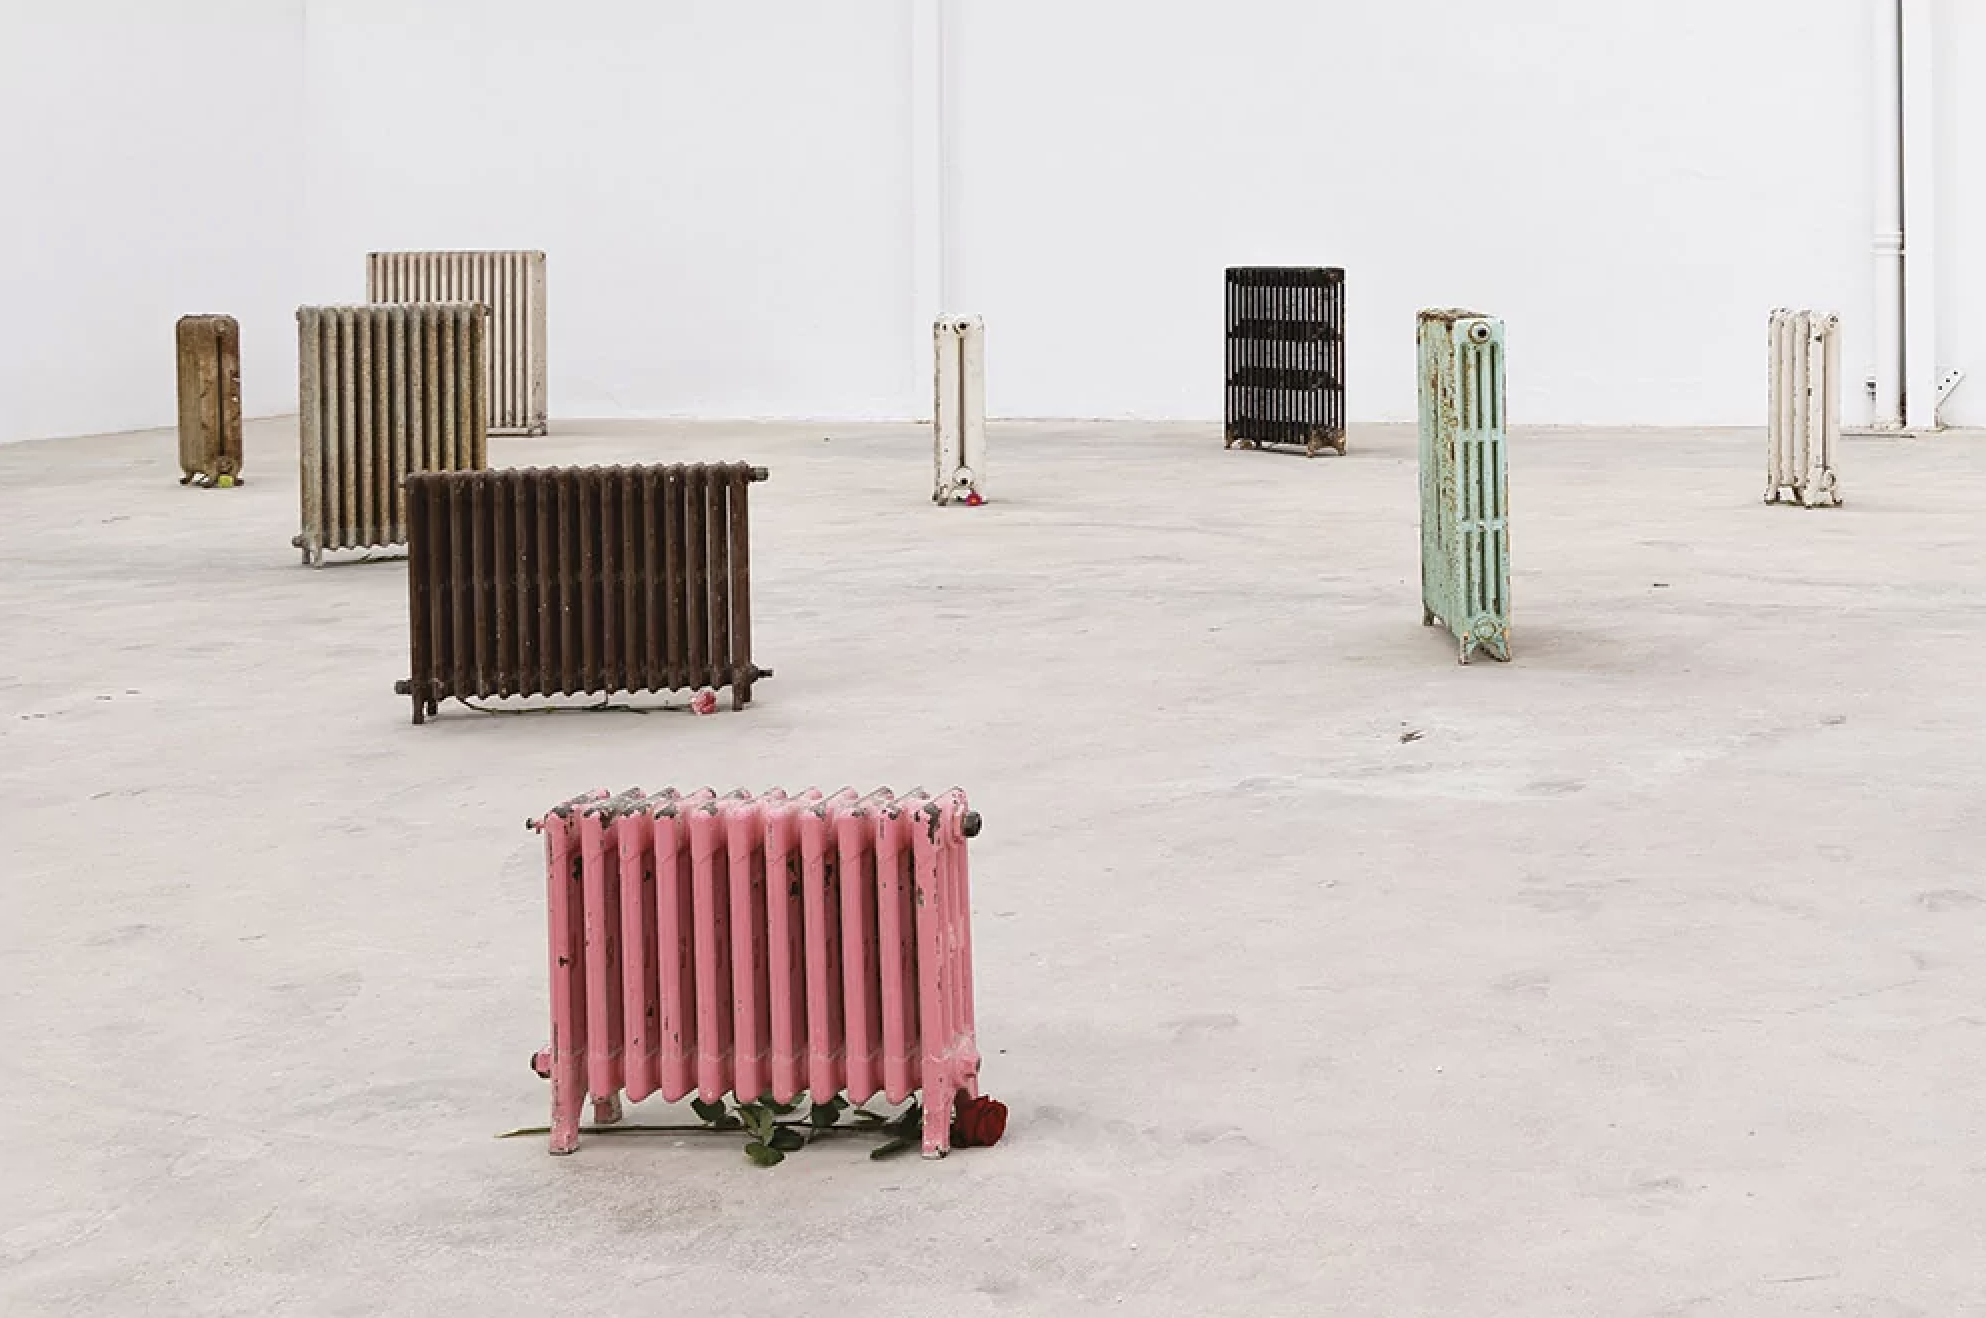 Sislej Xhafa – Sister Valley 2022, heaters, flowers, variable dimensions. Exhibition view Galleria Continua / Les Moulins, France. Photo: Allison Borgo